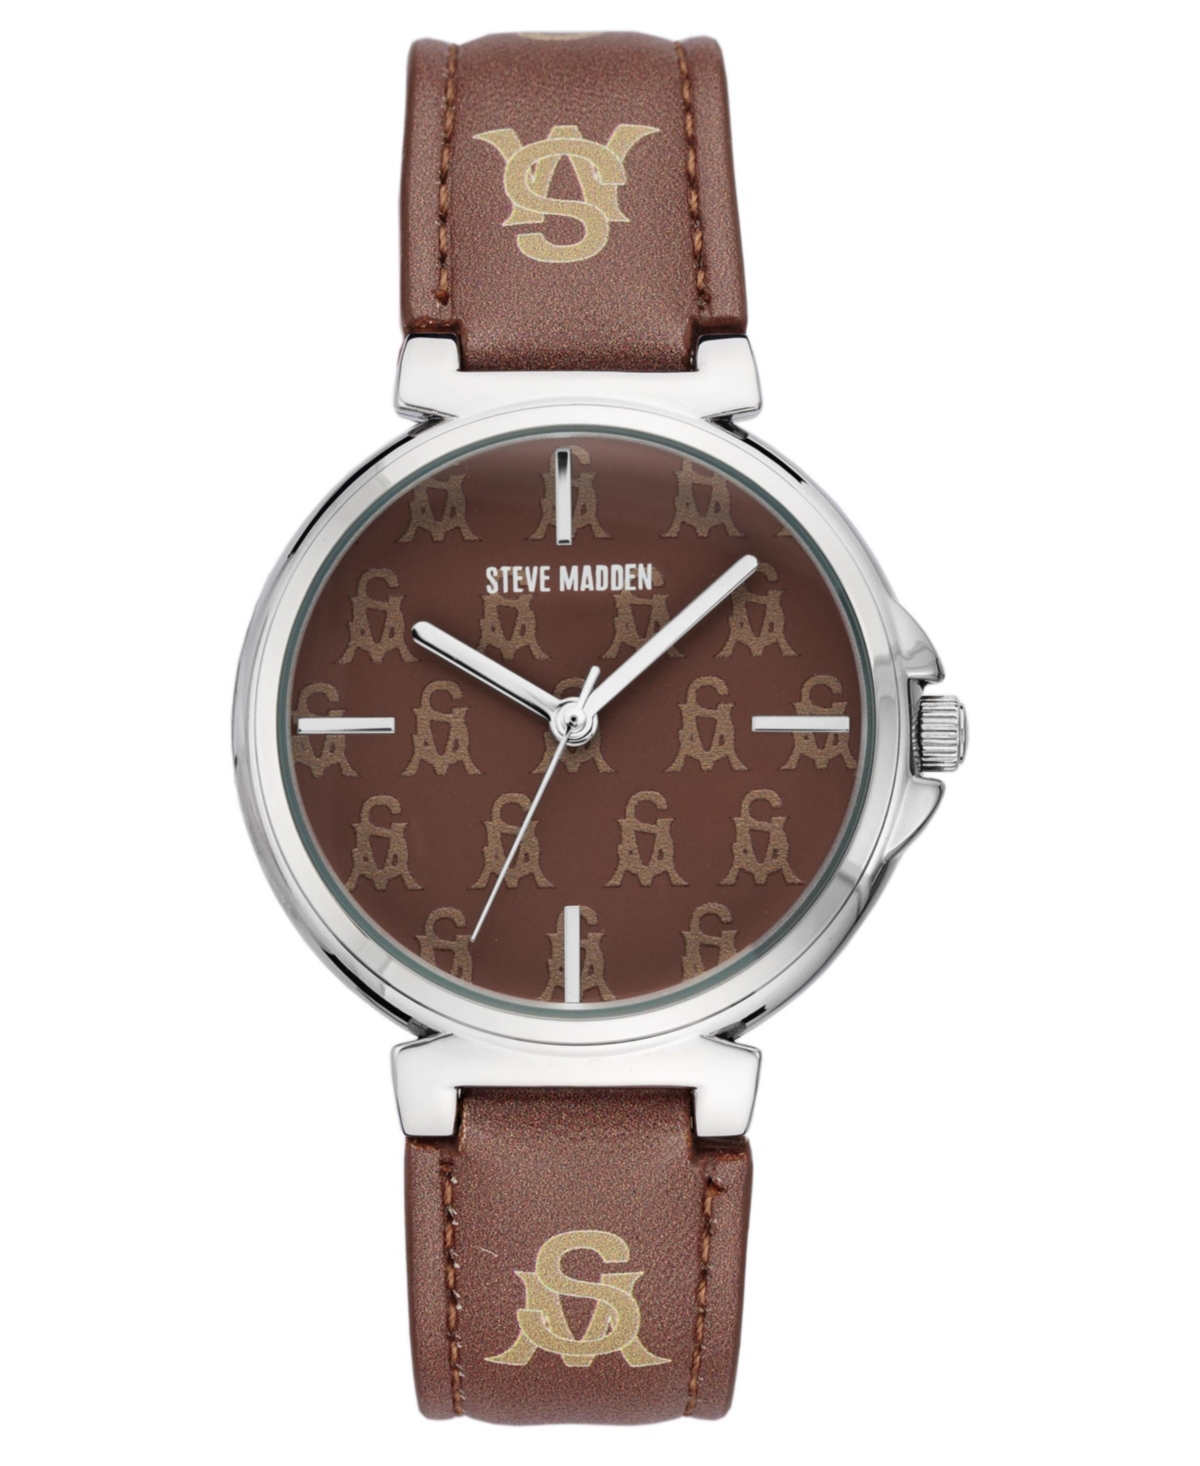 Women's Dual Colored Dark Brown and Light Brown Polyurethane Leather Strap with Steve Madden Logo and Stitching Watch, 36mm - Light, Dark